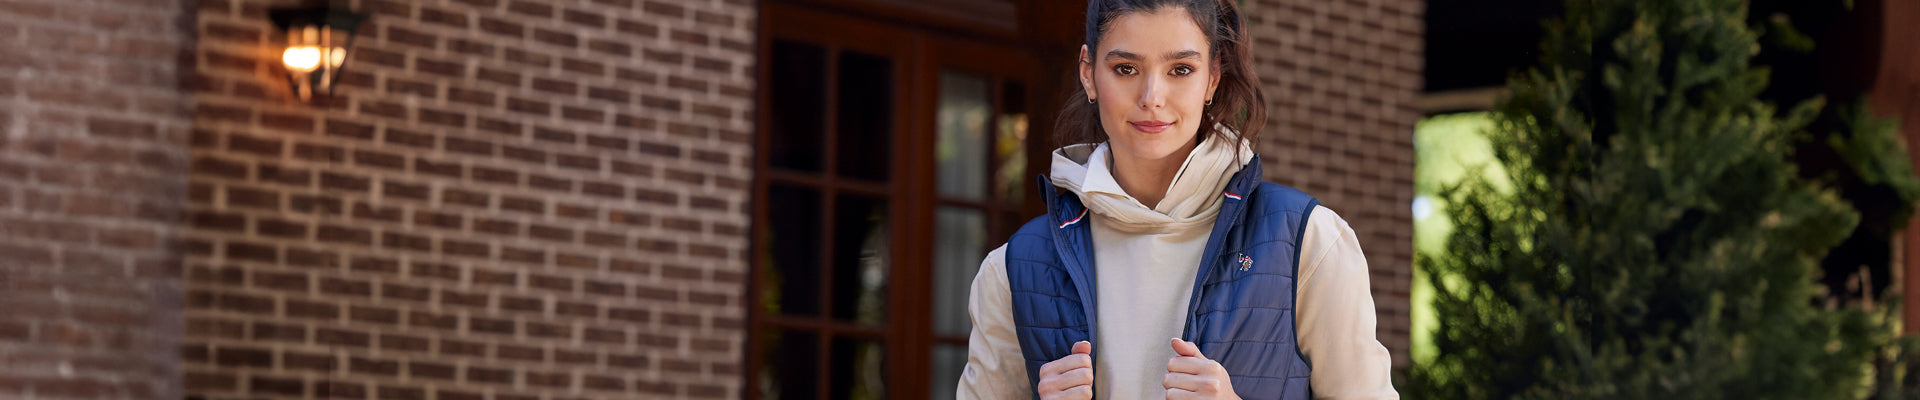 The U.S Polos Assn. Women’s Gilet collection includes sleeveless outerwear pieces perfect for layering in all seasons for added warmth and style. Our padded gilets have a regular fit and feature a funnel neck design for added comfort. 